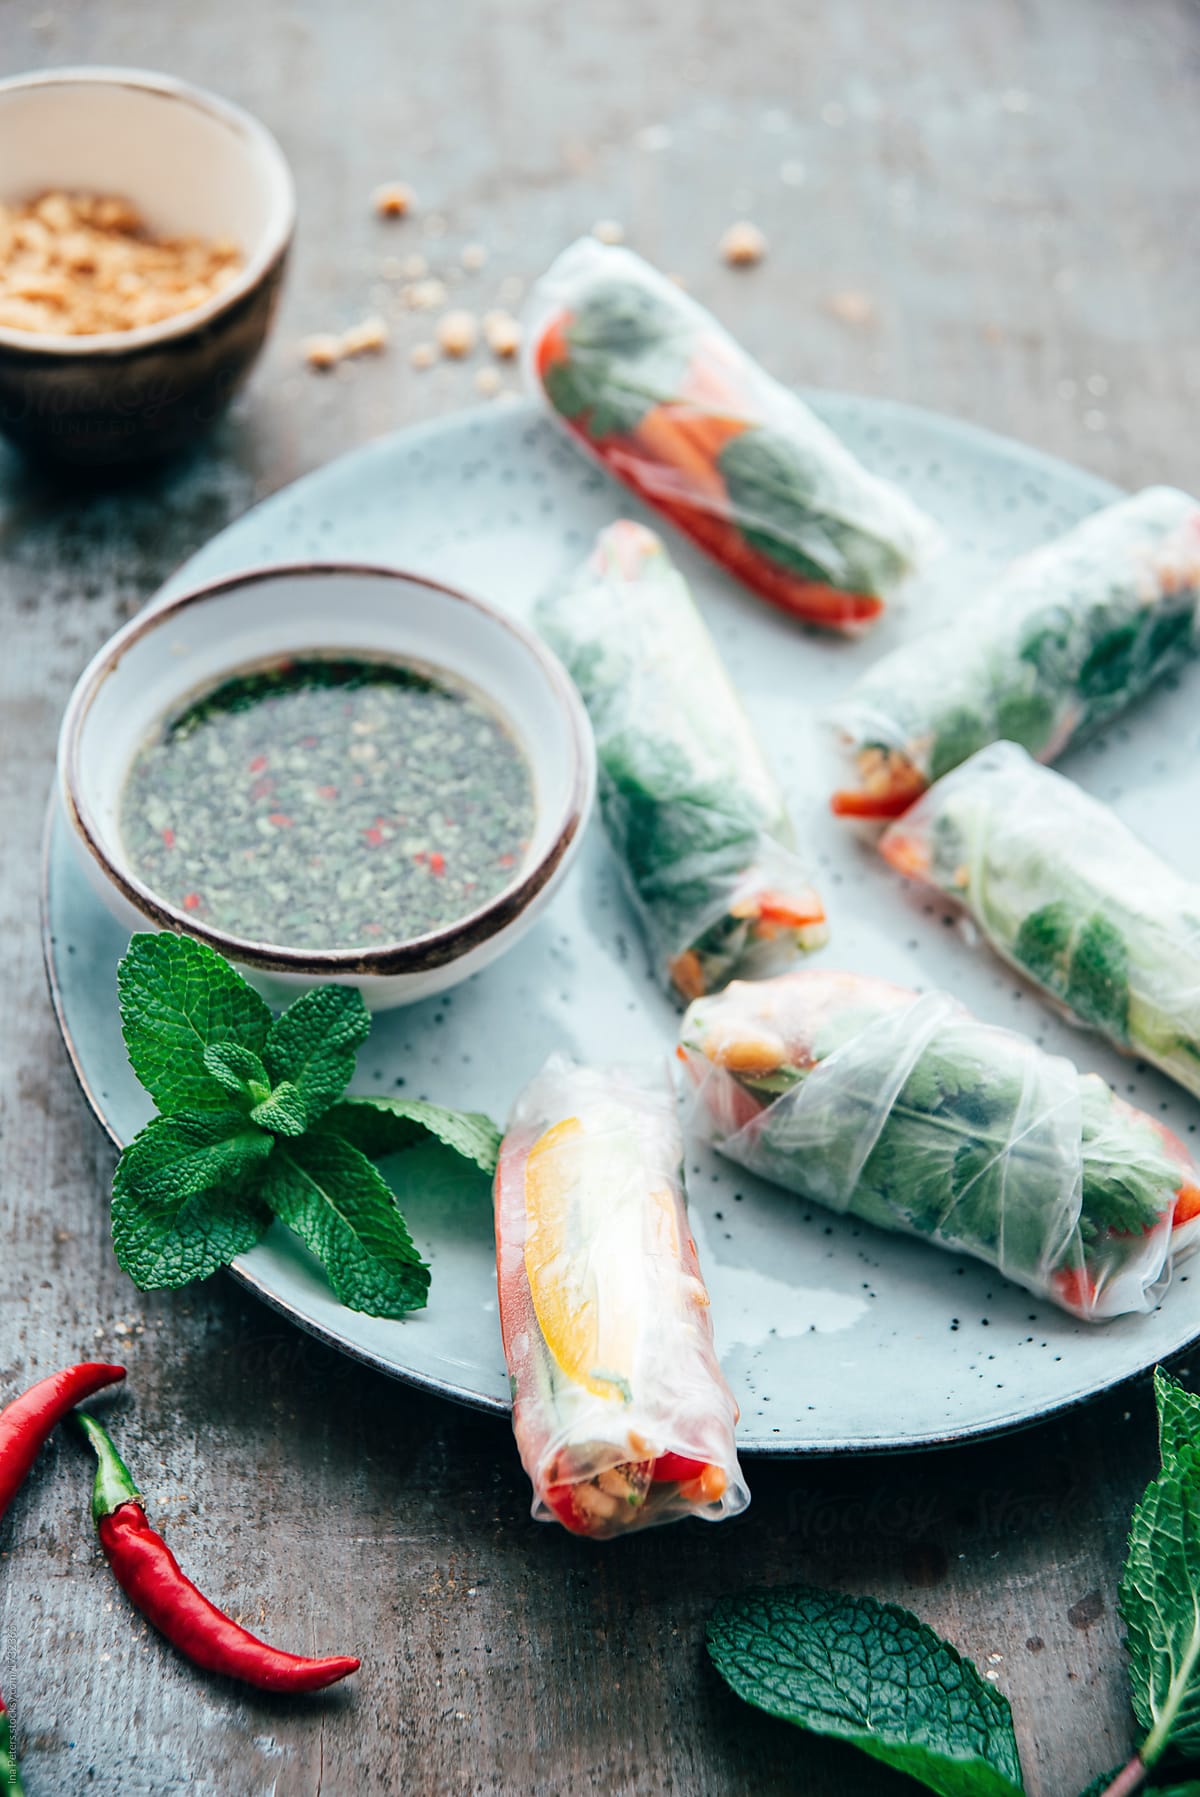 Food: Vietnamese summer roll with vegetables and sauce, vegan